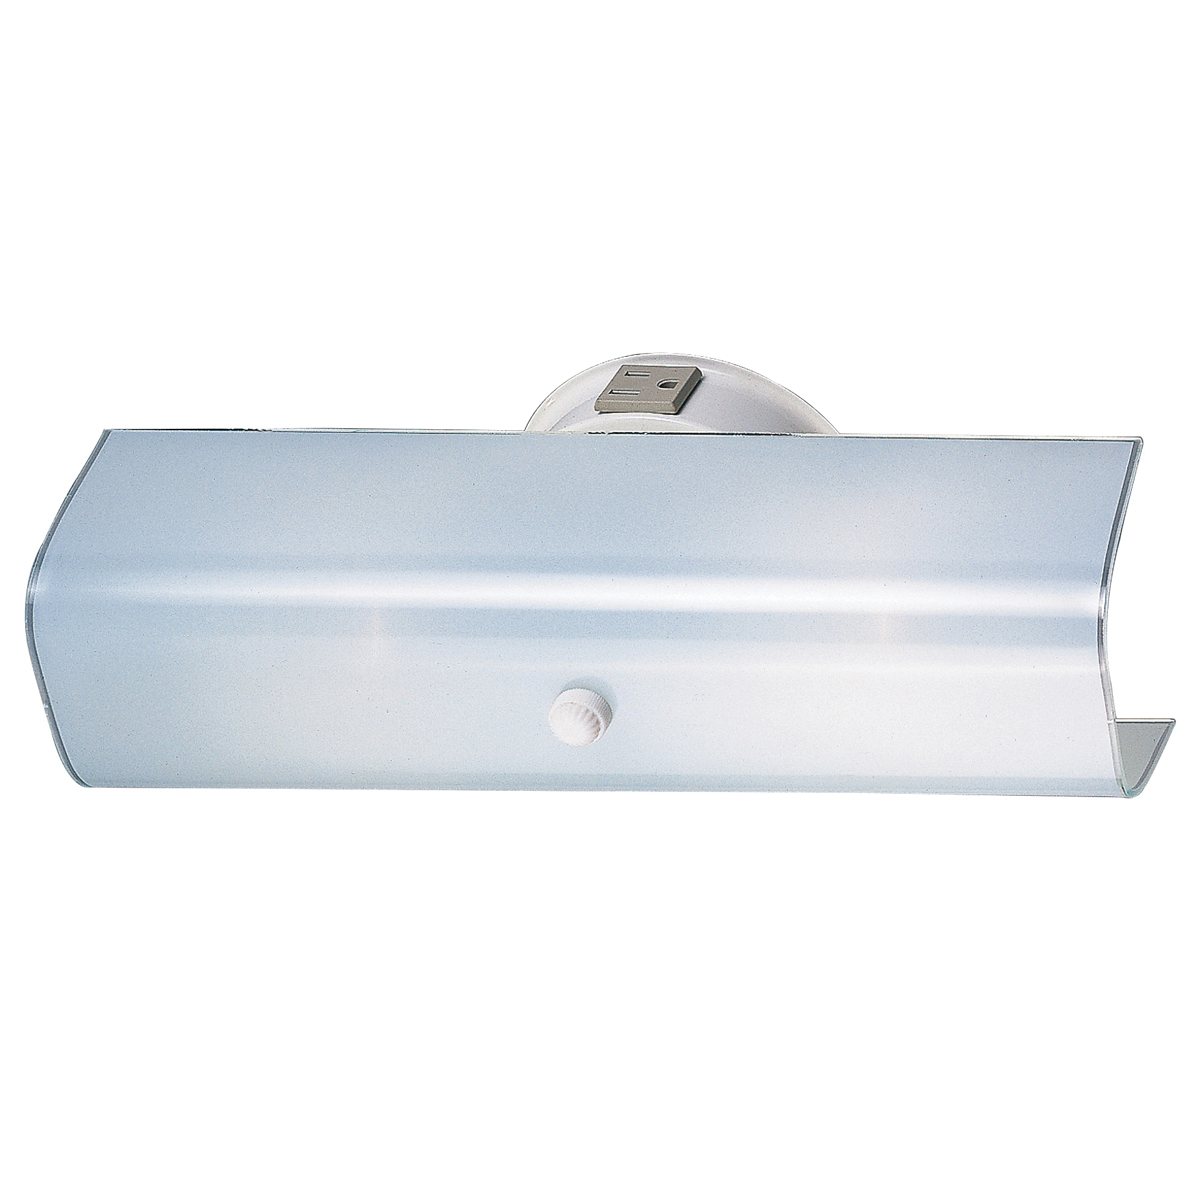 Boston Harbor V88WH02-4413H-3L Bracket Wall Light Fixture, 75 W, 2-Lamp, A19 or CFL Lamp, Steel Fixture - 1